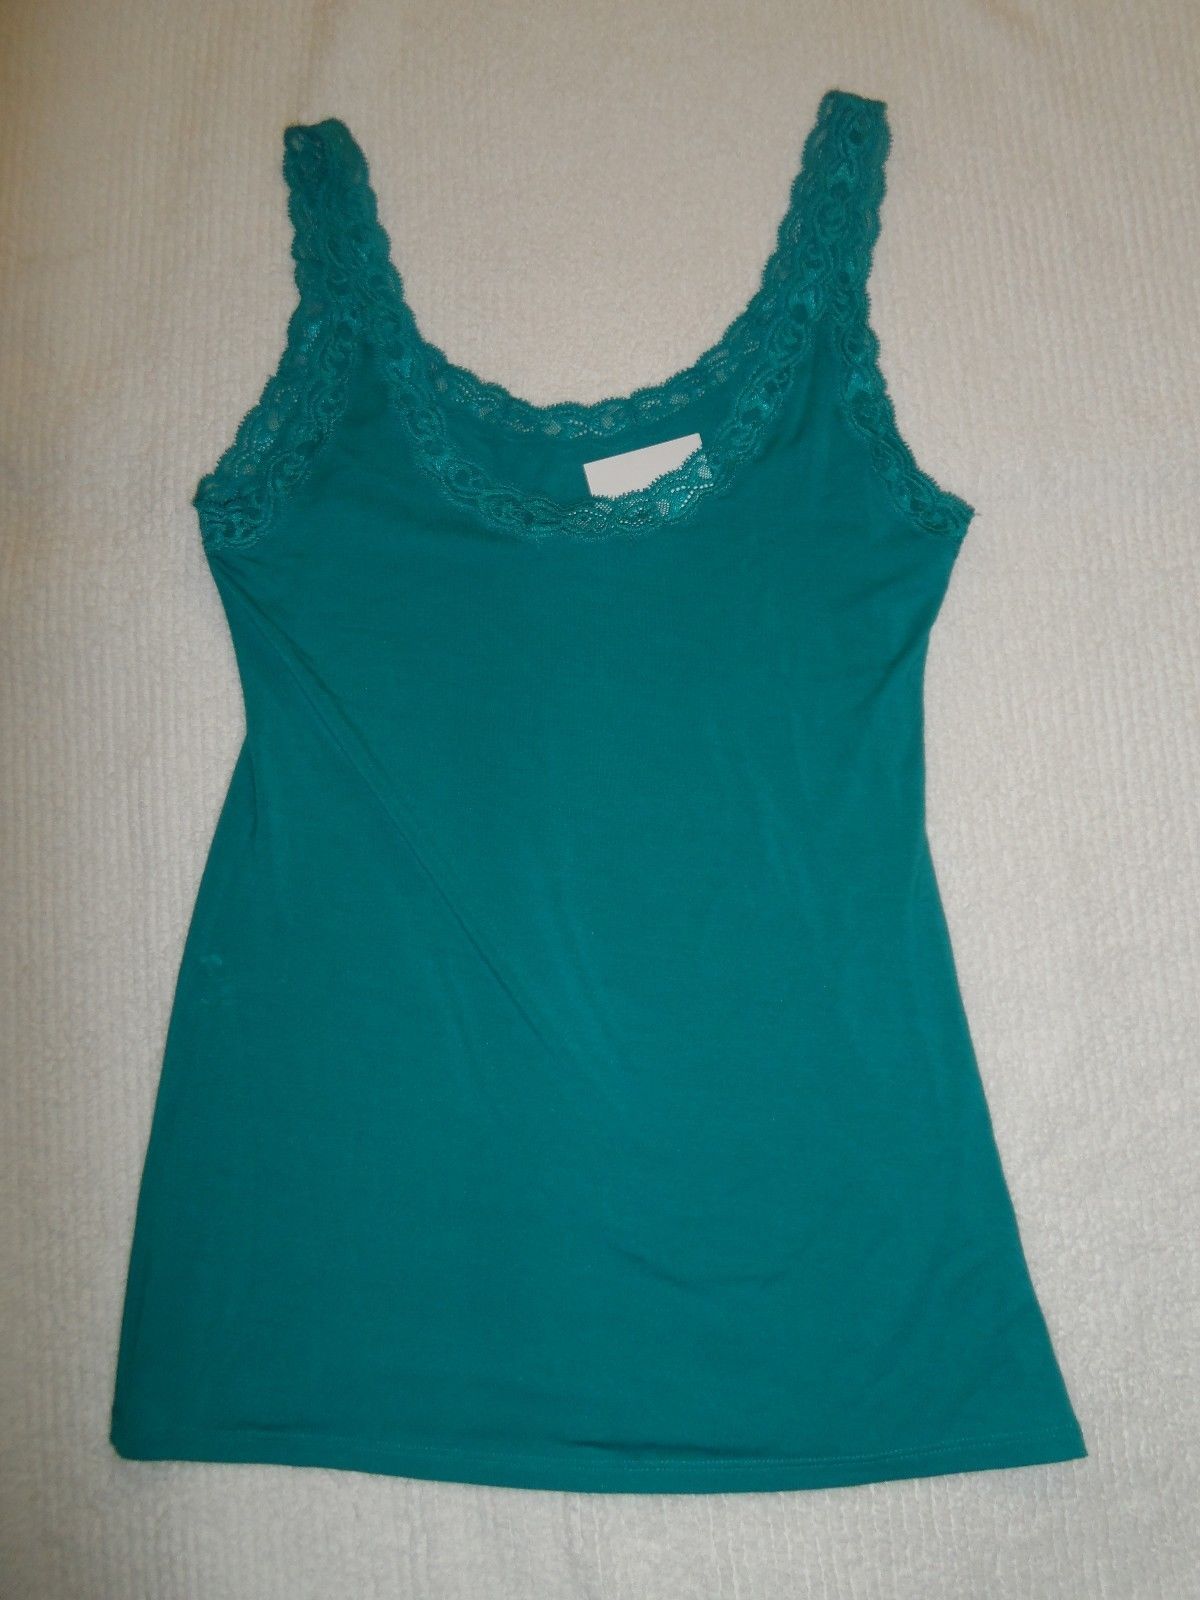 Primary image for Natori feathers tank TEAL SIZE S